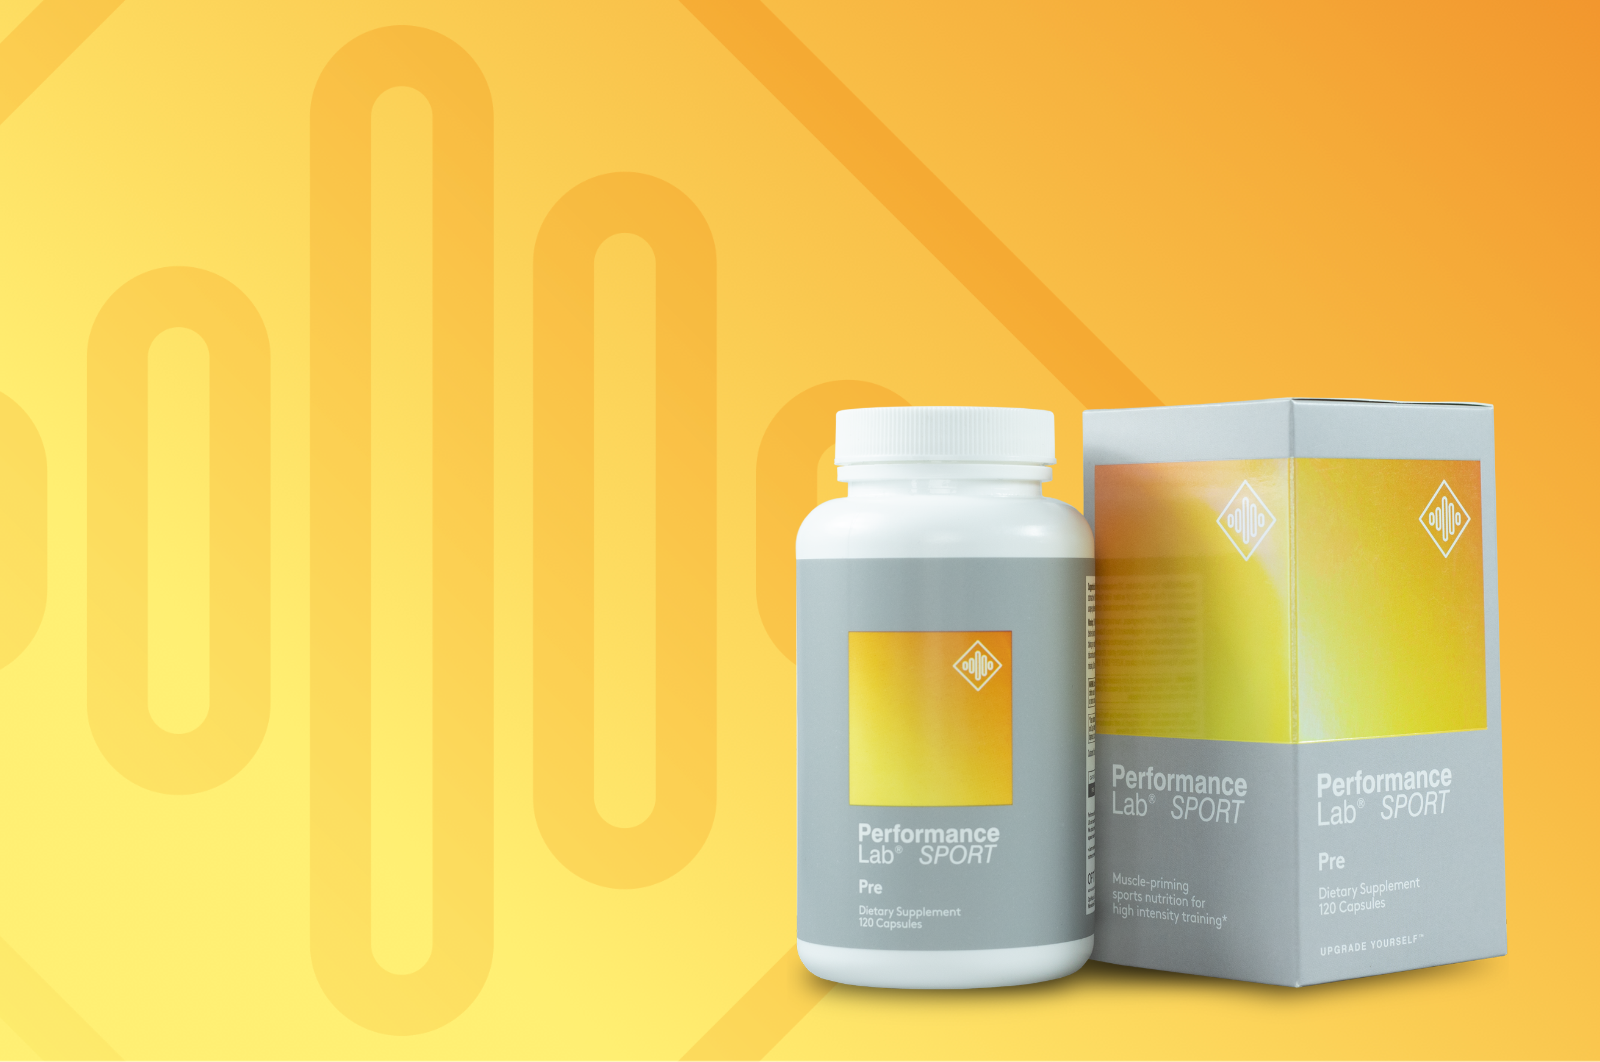 Performance Lab Pre is free from artificial sweeteners and flavors